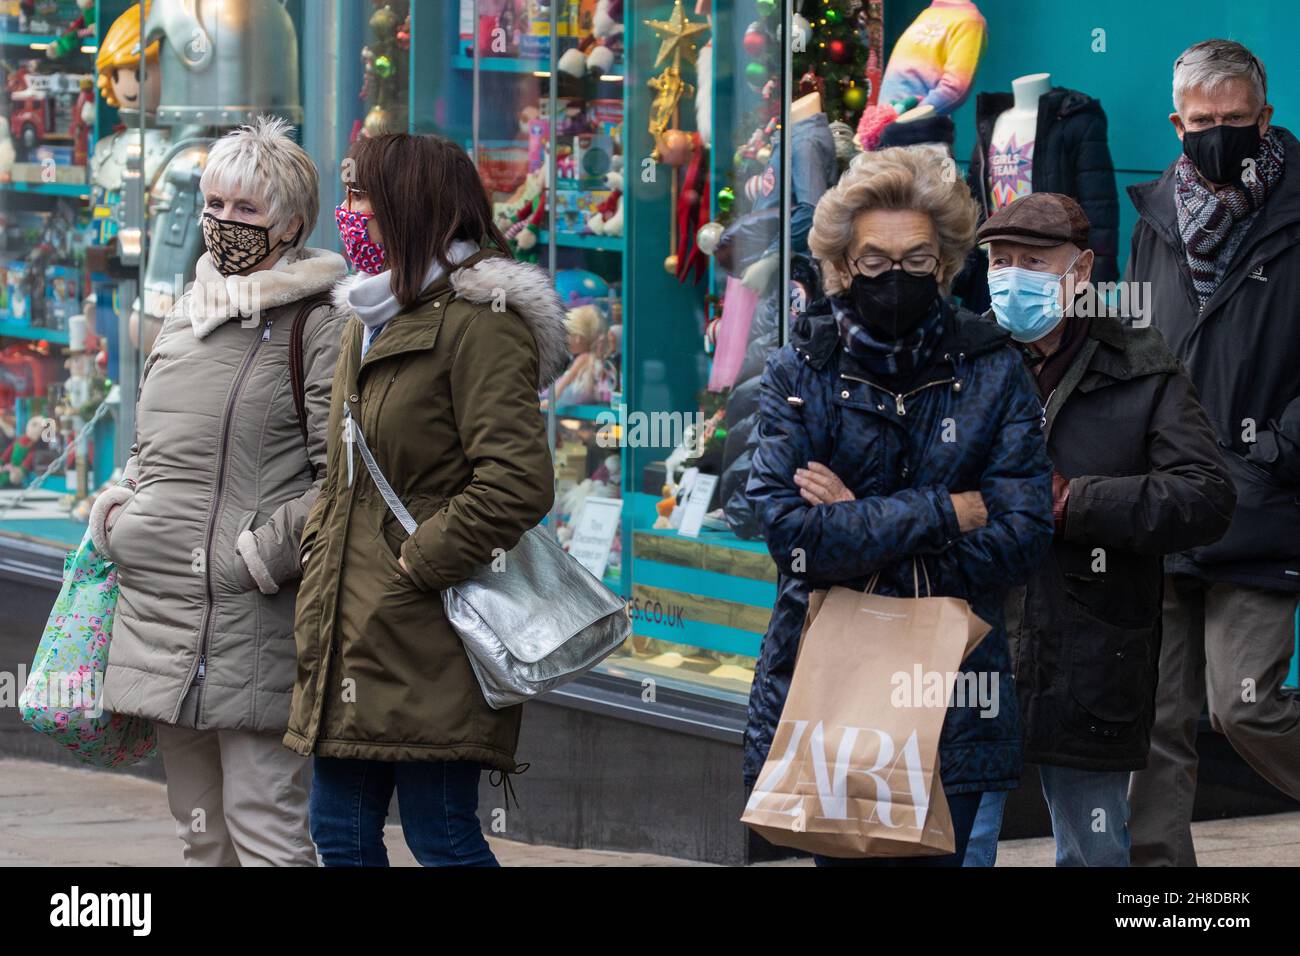 Windsor, UK. 29th November, 2021. Shoppers wear face coverings as they leave a department store. The Health Secretary Sajid Javid yesterday announced following the emergence in the UK of the Omicron coronavirus variant that the wearing of face masks would become mandatory in shops and on public transport with effect from 4am on 30th November, with fines ranging between £200-£6,400 to be issued to people in England who fail to wear them depending on the number of offences. Credit: Mark Kerrison/Alamy Live News Stock Photo